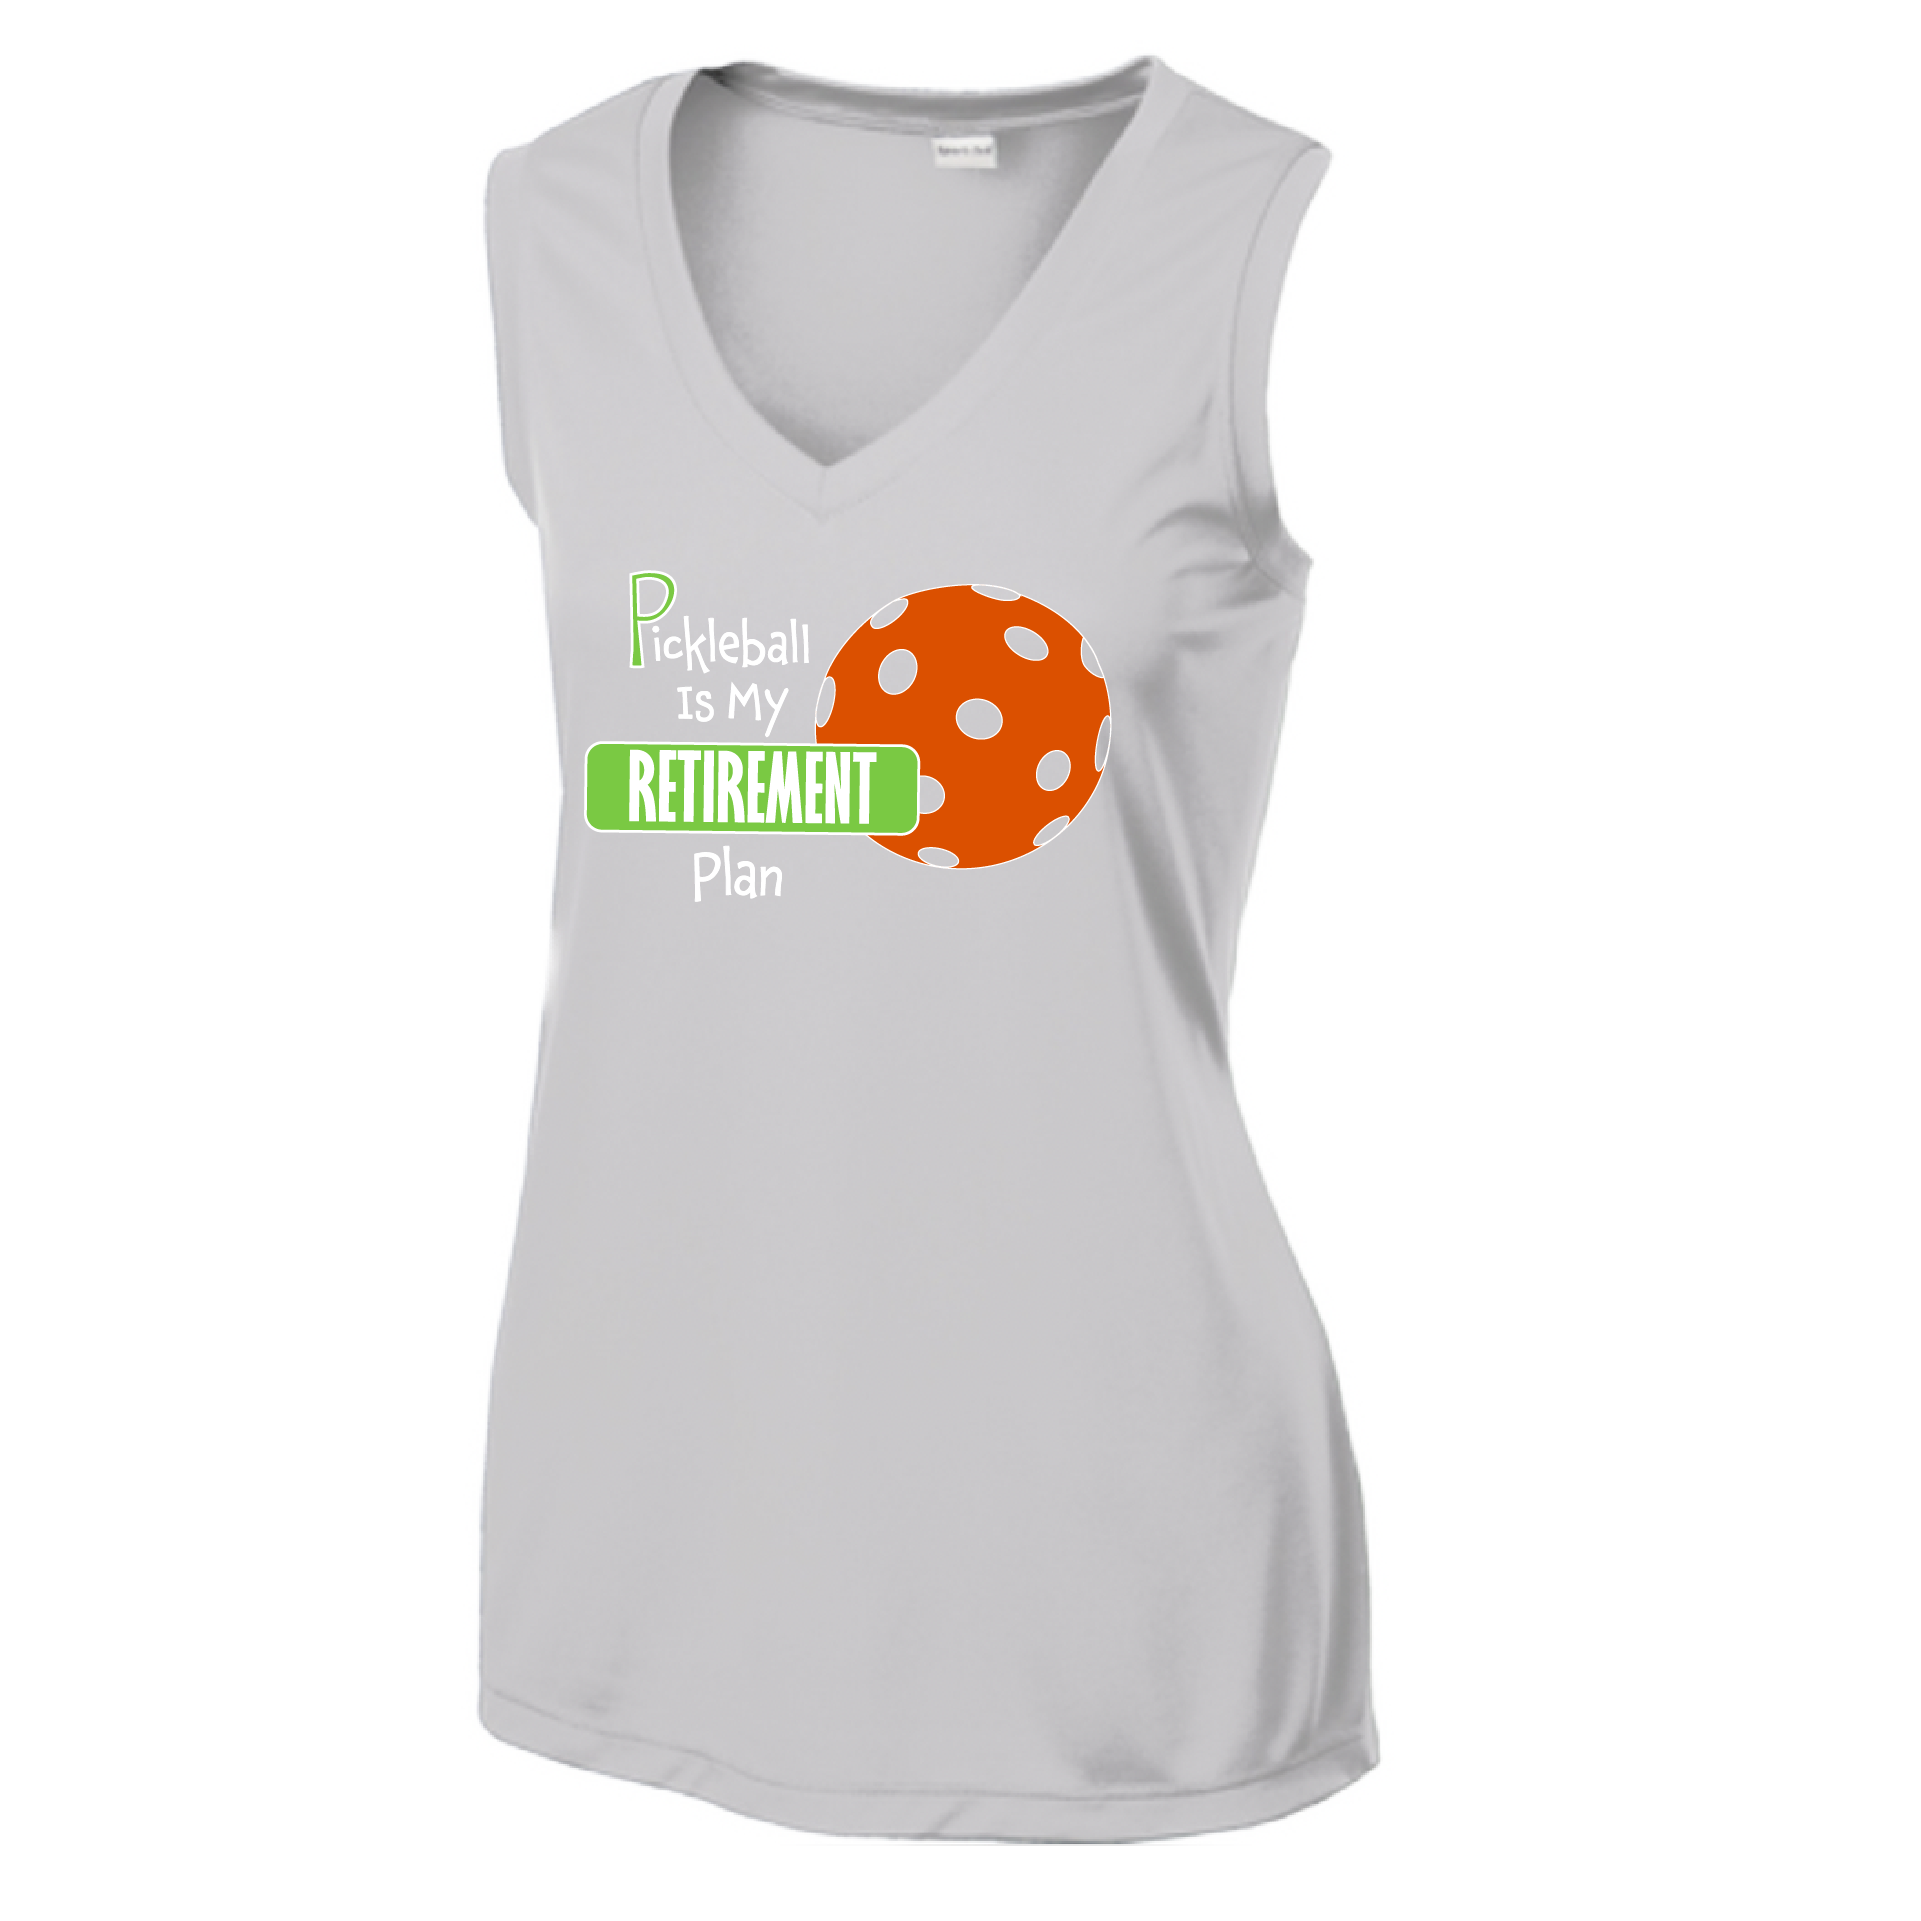 Pickleball Design: Pickleball is my Retirement plan  Women's Style: Sleeveless Tank  Turn up the volume in this Women's shirt with its perfect mix of softness and attitude. Material is ultra-comfortable with moisture wicking properties and tri-blend softness. PosiCharge technology locks in color. Highly breathable and lightweight.